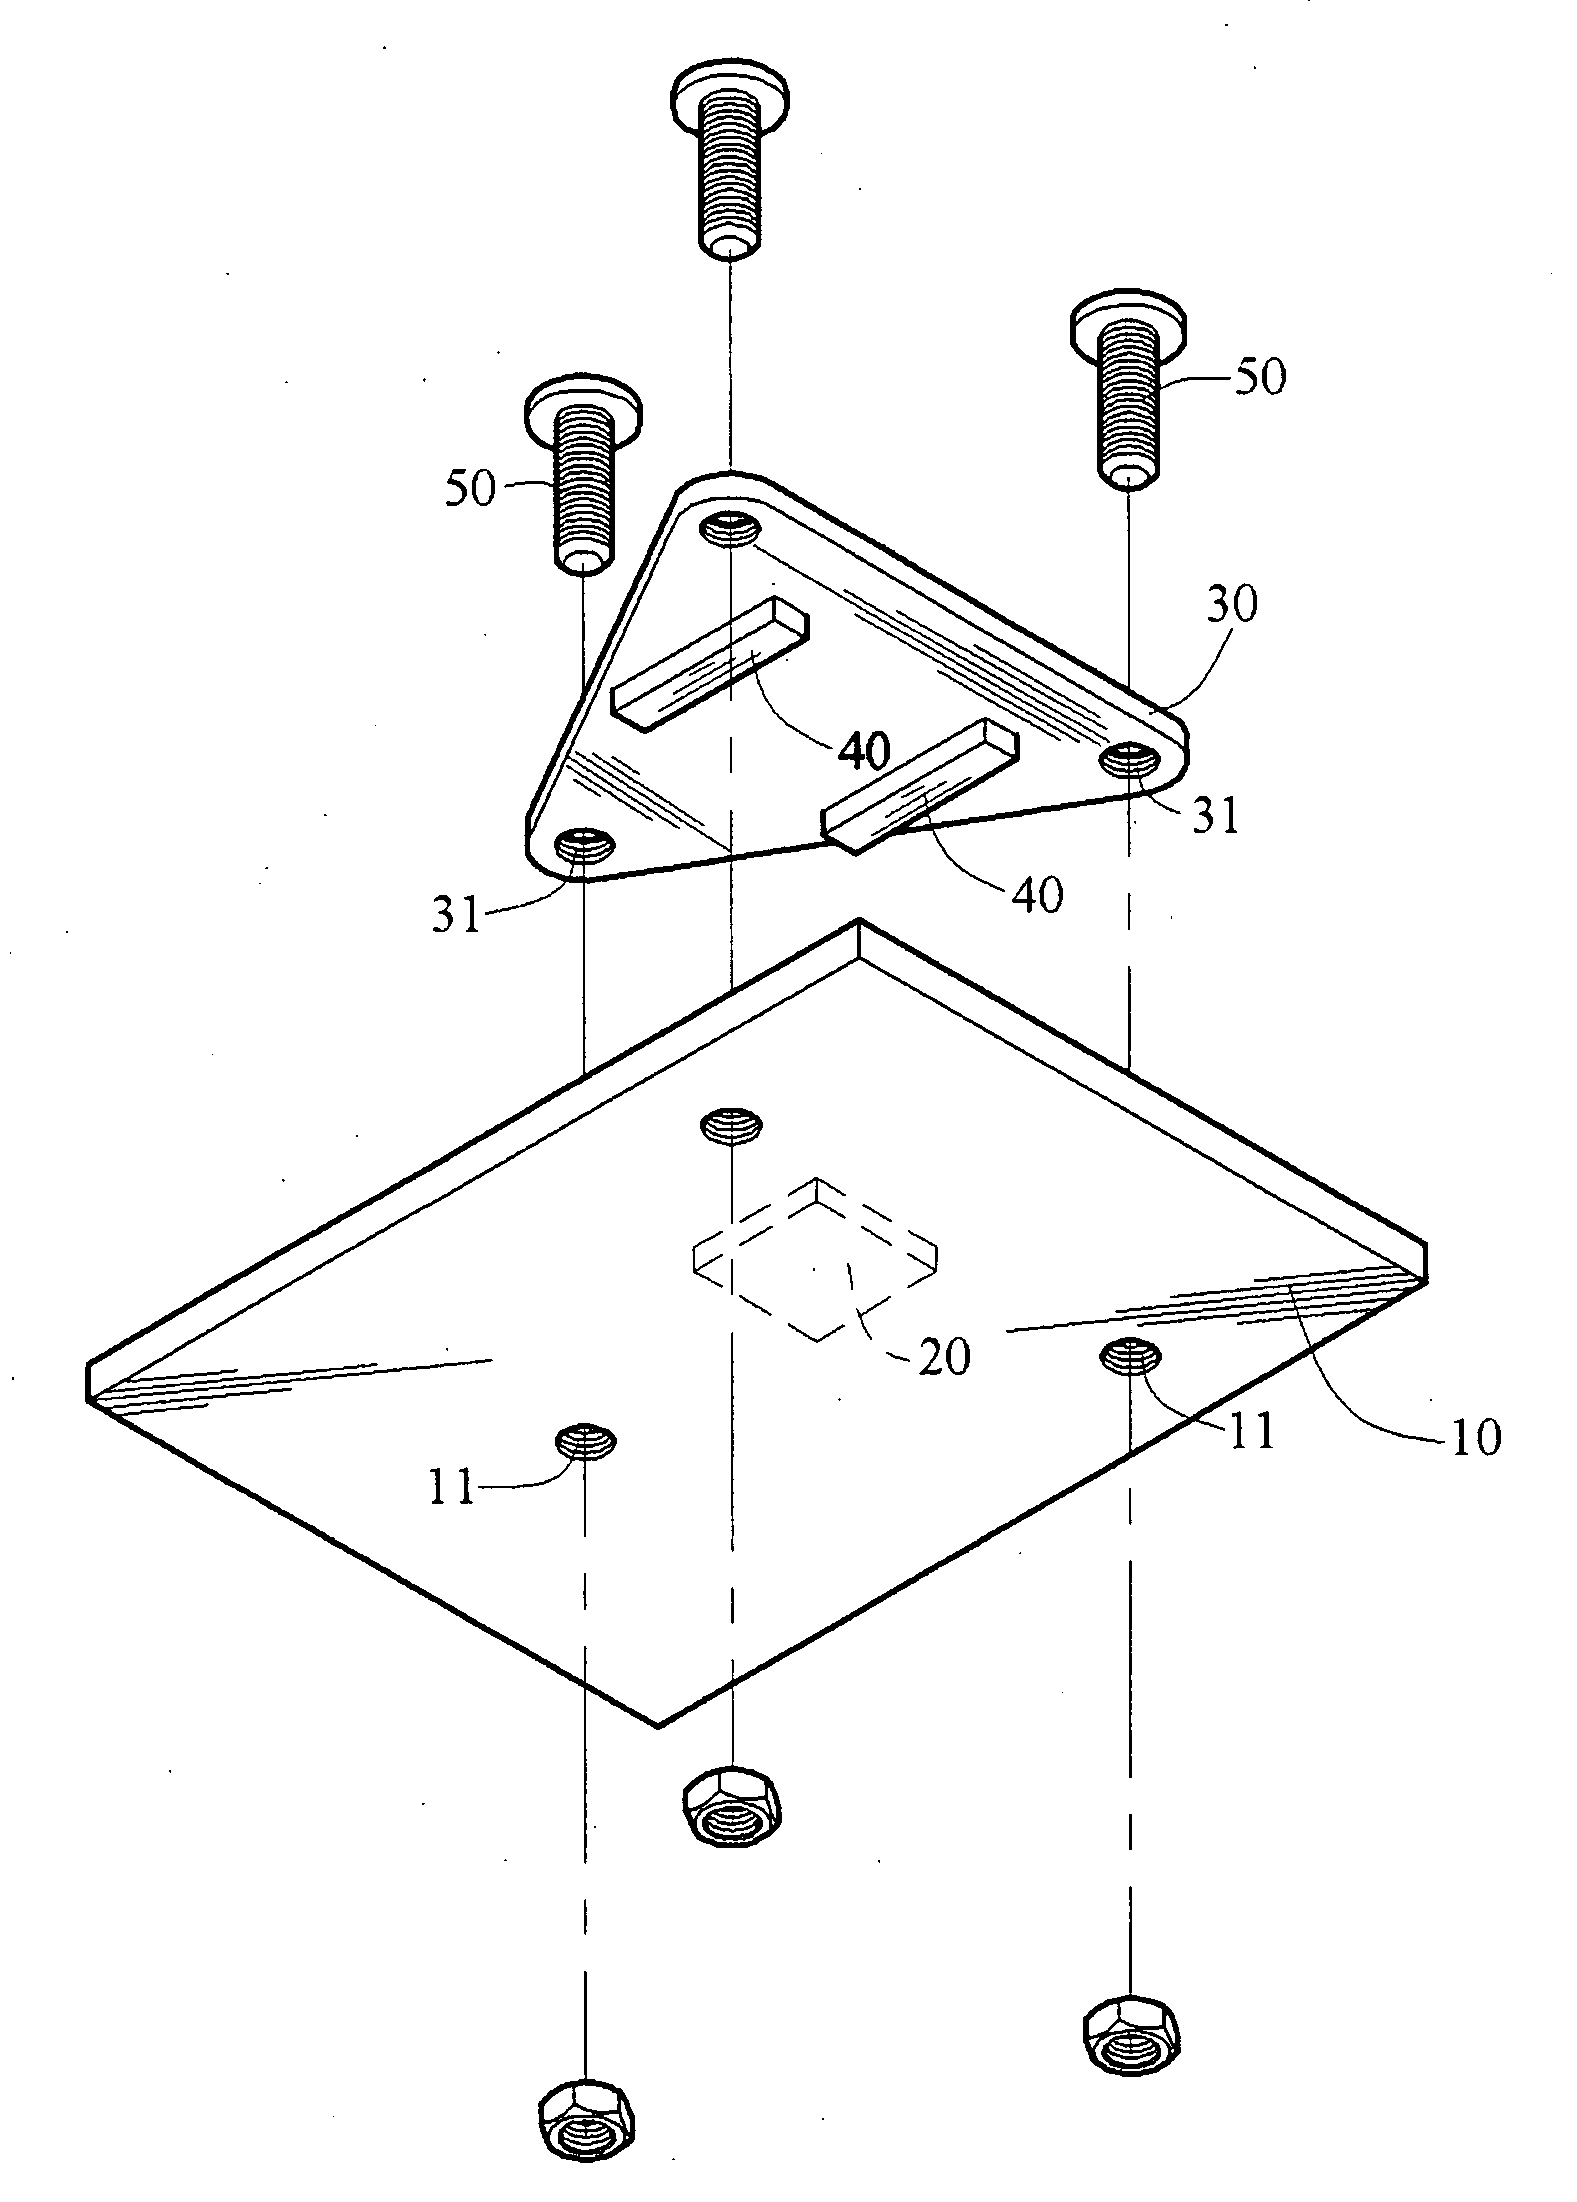 Heat plate construction and attachment for dismounting heat plate